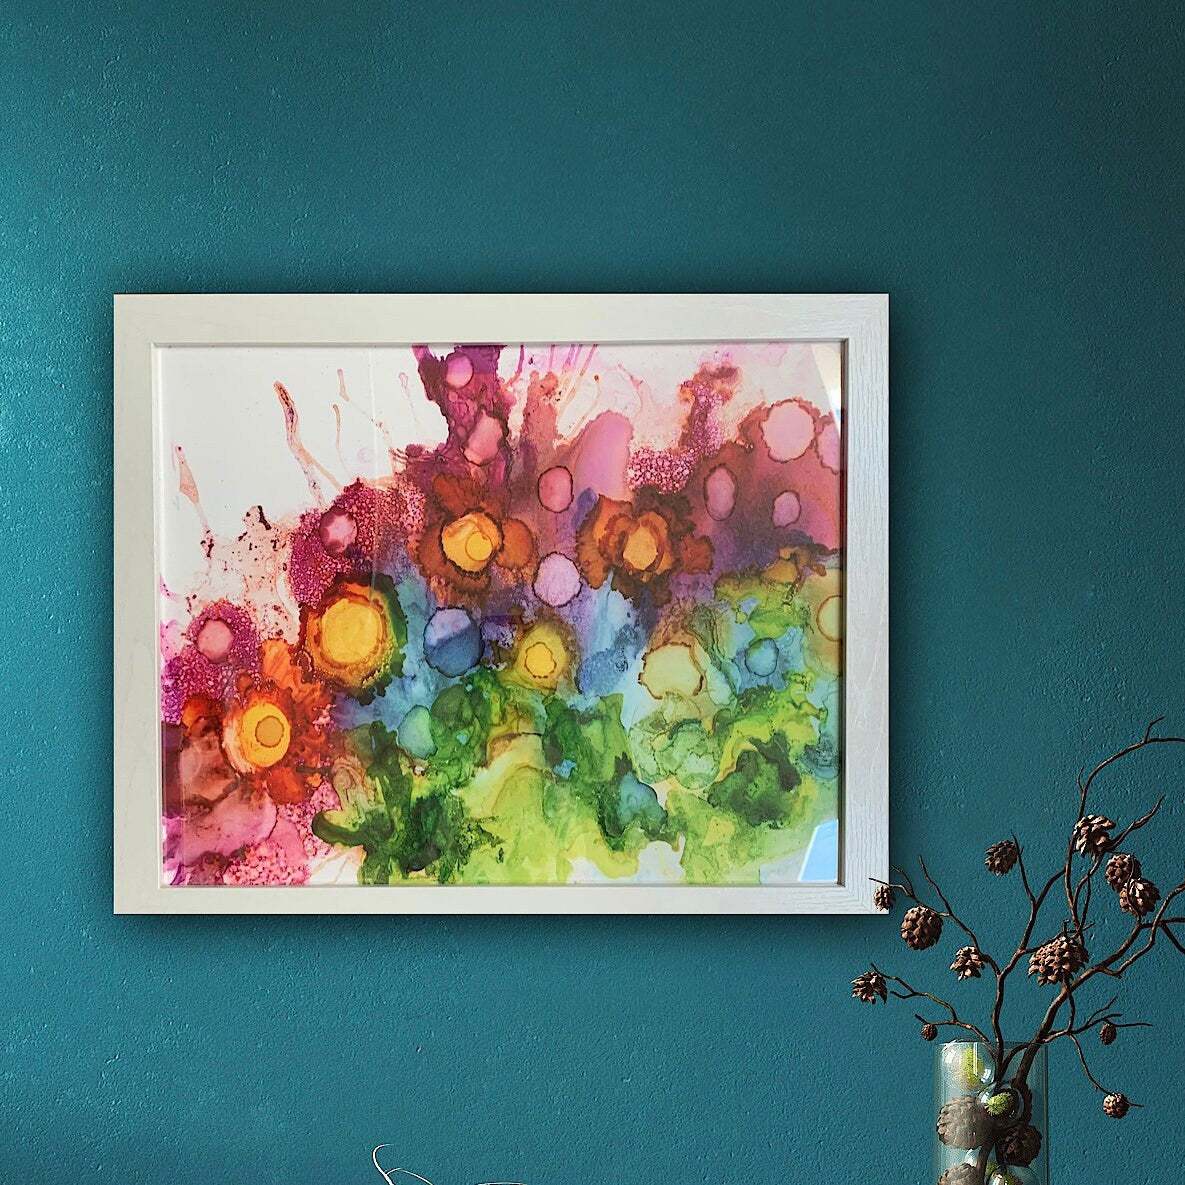 Summer Garden Ink Abstract Painting #1 Vivid Rainbow colors Whimsical One of a kind nature wall art Garden decor flower lover gift Print